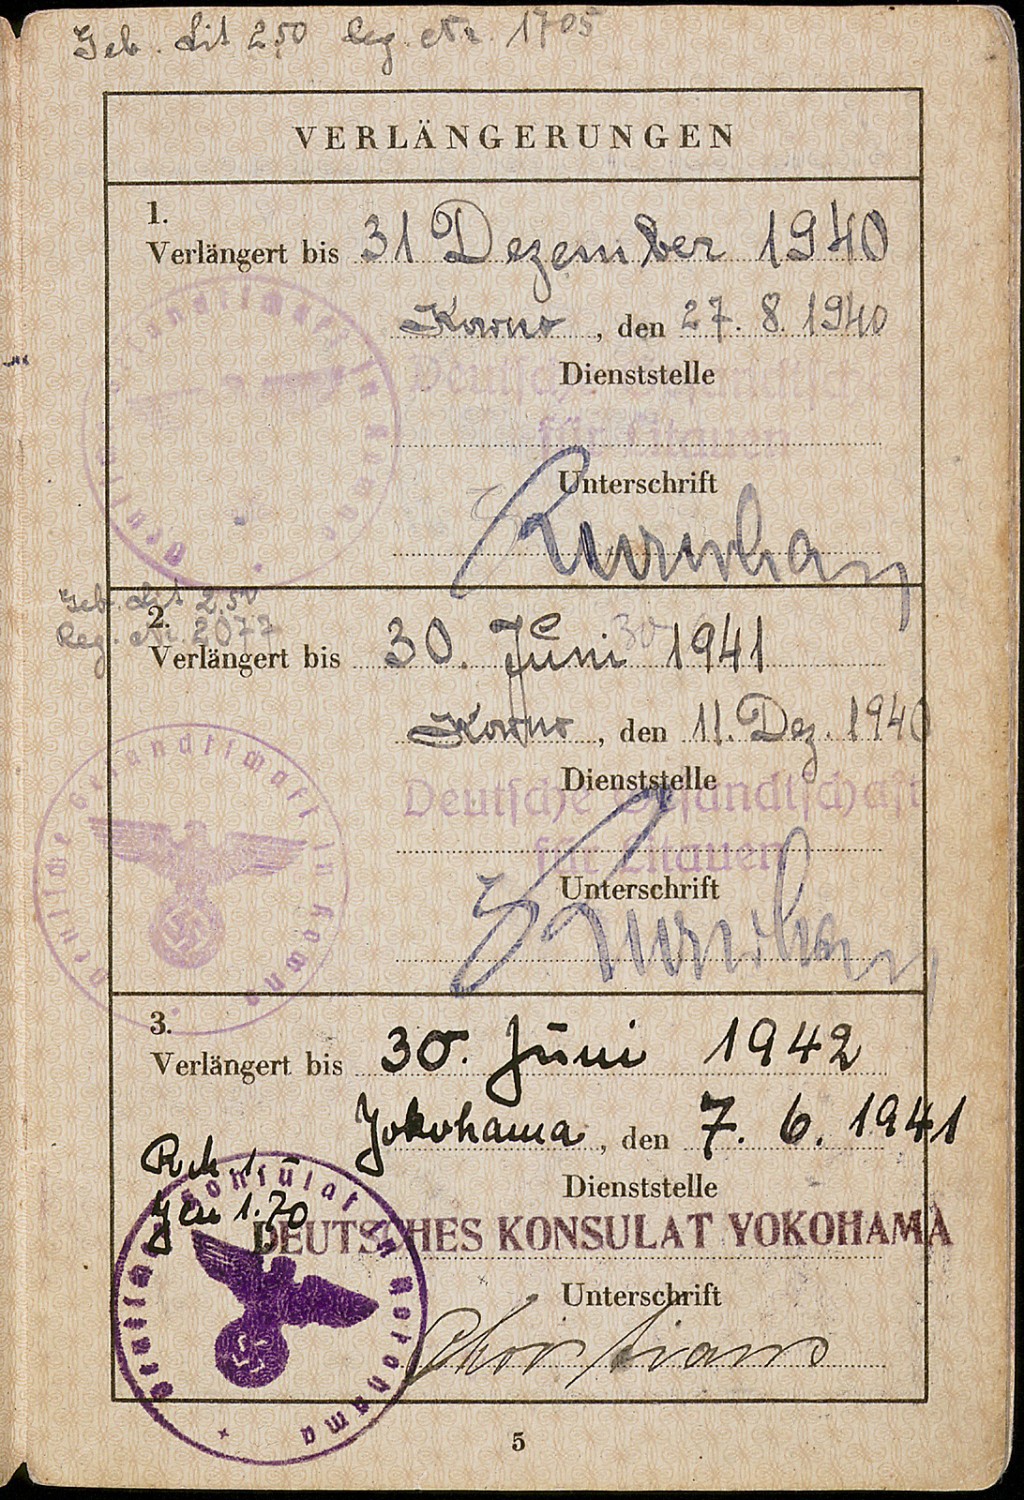 Page 5 of passport issued to Setty Sondheimer